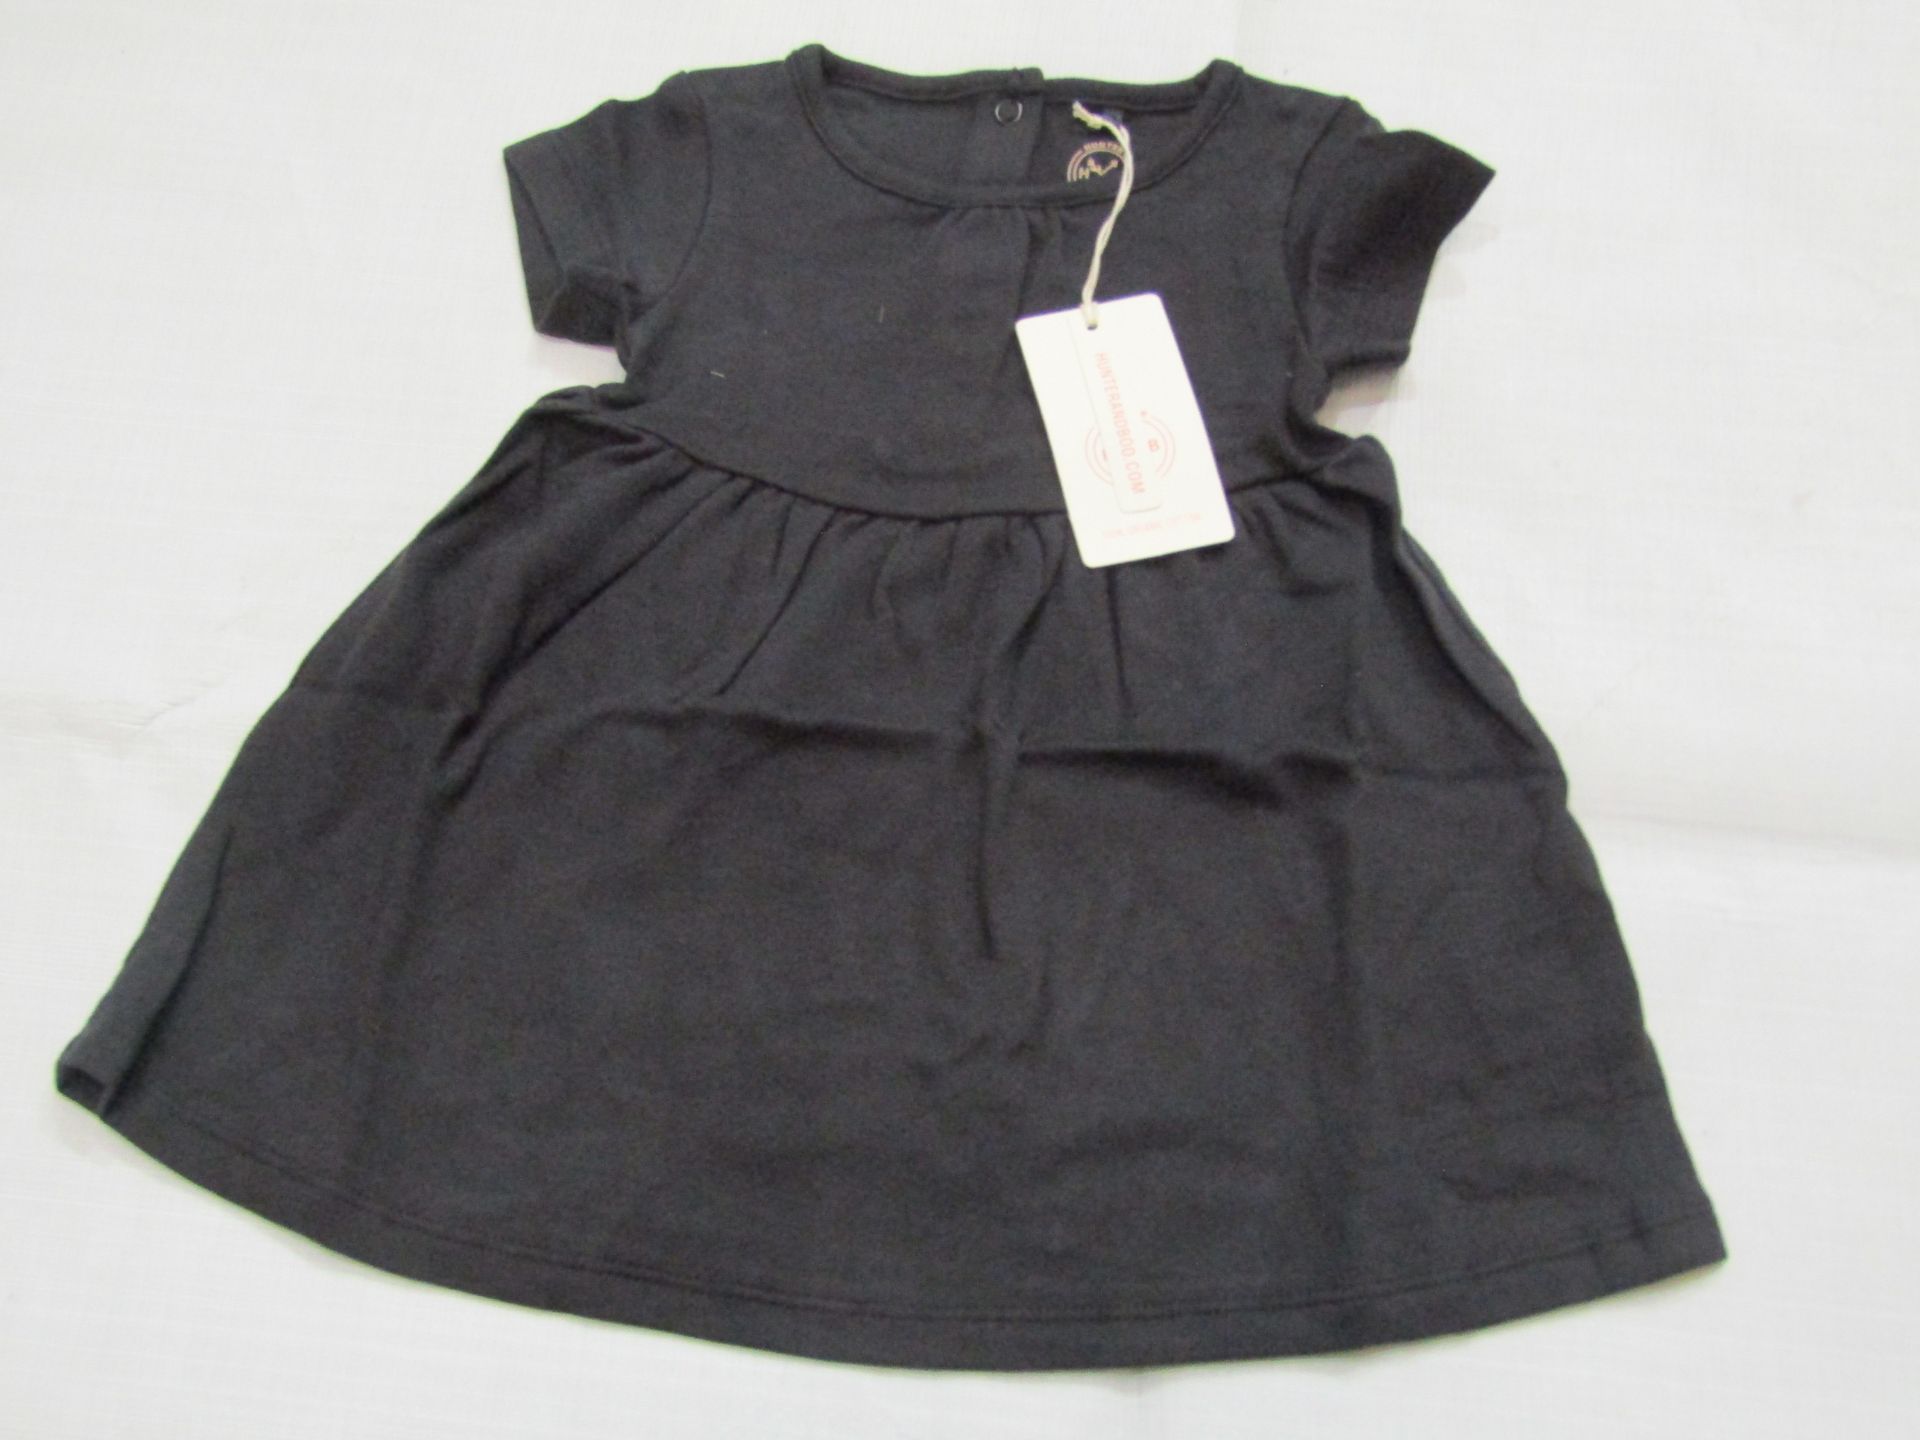 Hunter & Boo Dress Black Aged 6-12 Months New & Packaged RRP £21